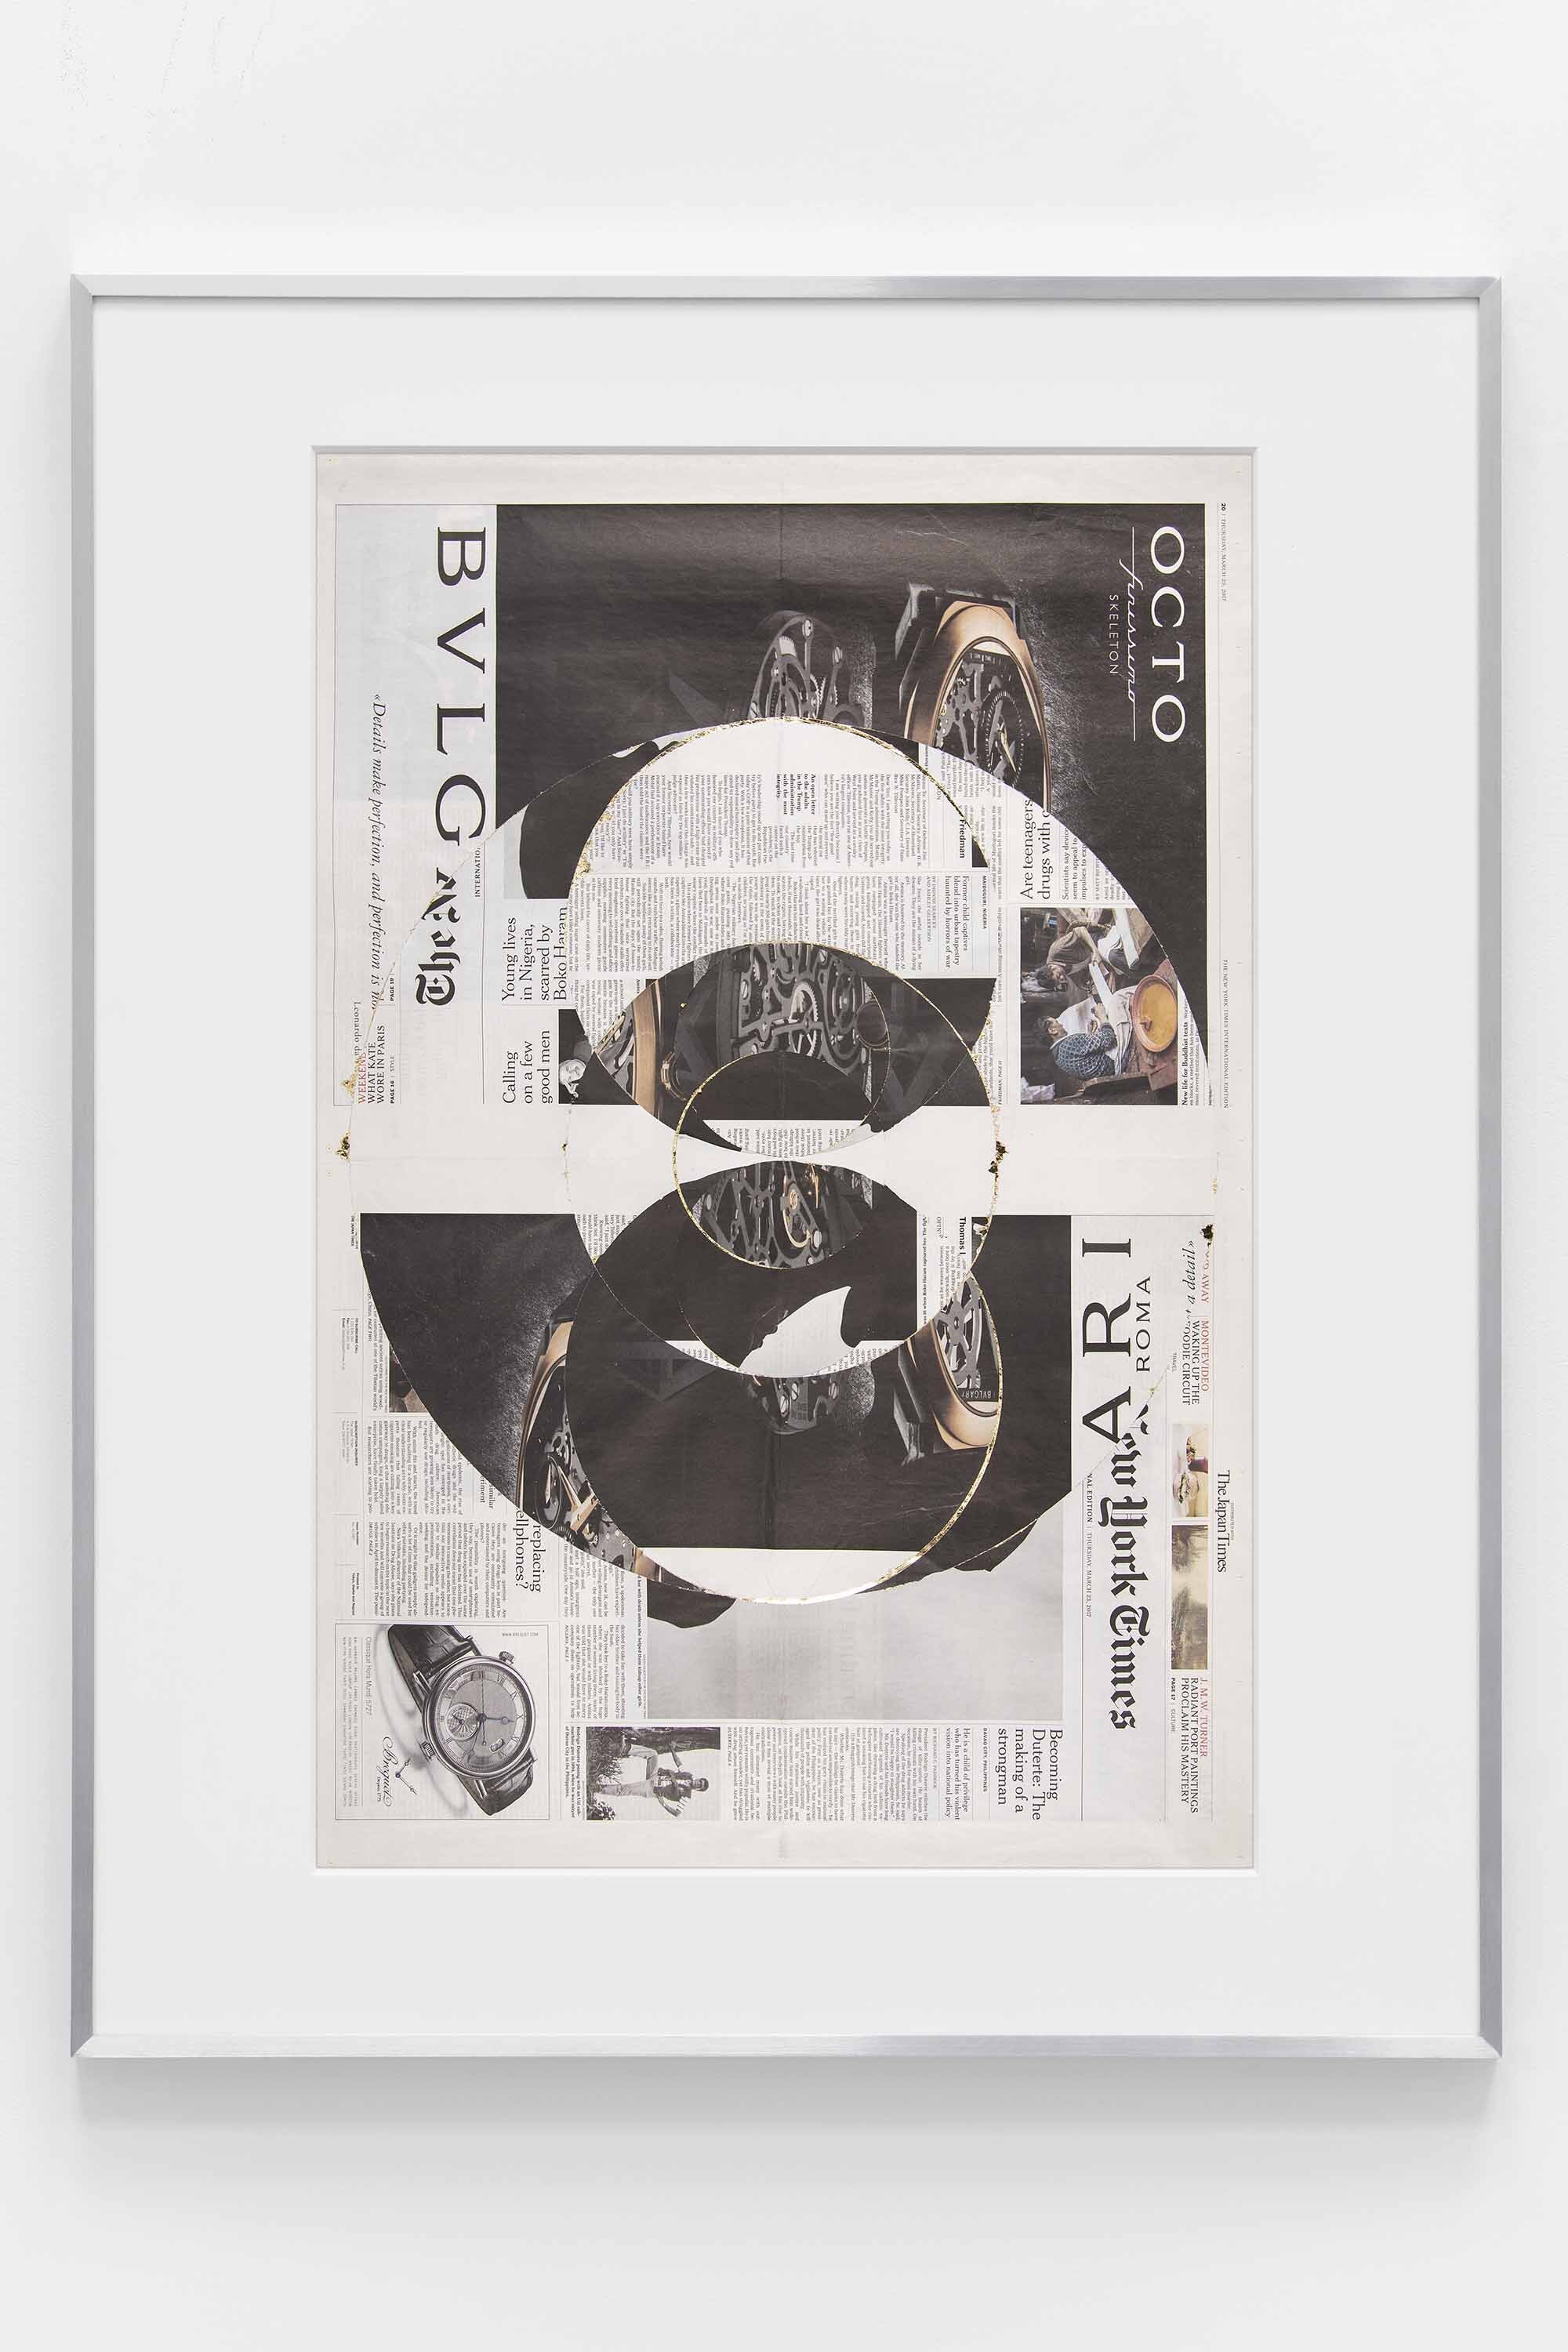   Blind Collage (Seven 180º Rotations, The New York Times International Edition, Distributed with The Japan Times: Tokyo, Japan, Thursday, March 23, 2017)    2021   Newspaper, tape, and 22 karat gold leaf  39 1/8 x 31 1/4 inches  Exhibition:   Foreig